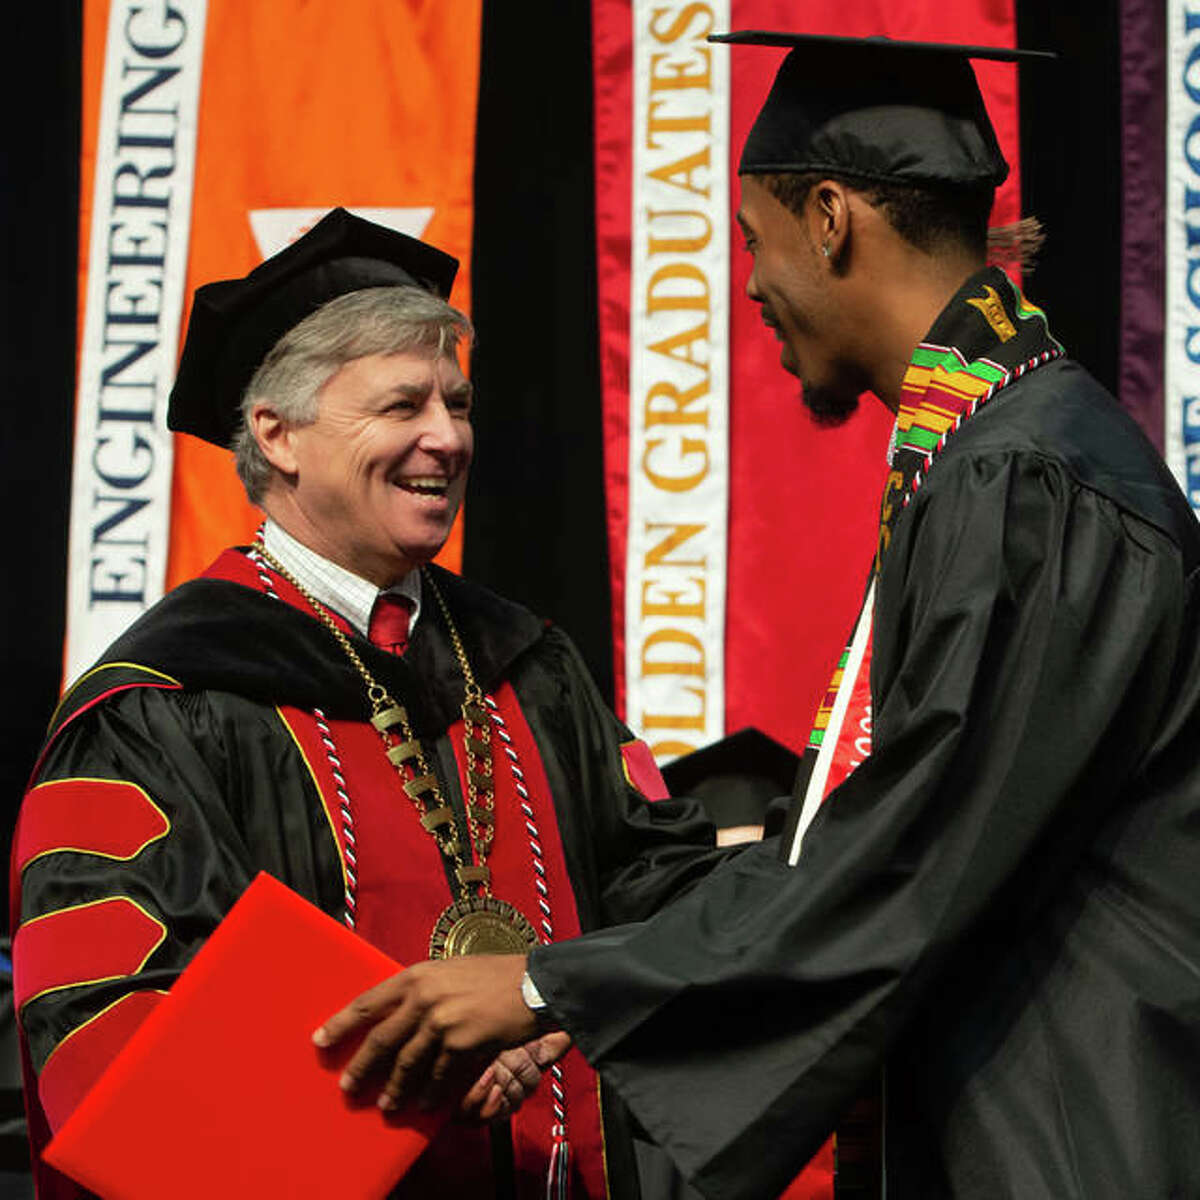 SIUE Chancellor Randy Pembrook congratulates Braxton McCarroll, president of SIUE Collegiate 100, at the 2019 Spring Commencement Ceremony for the School of Business.